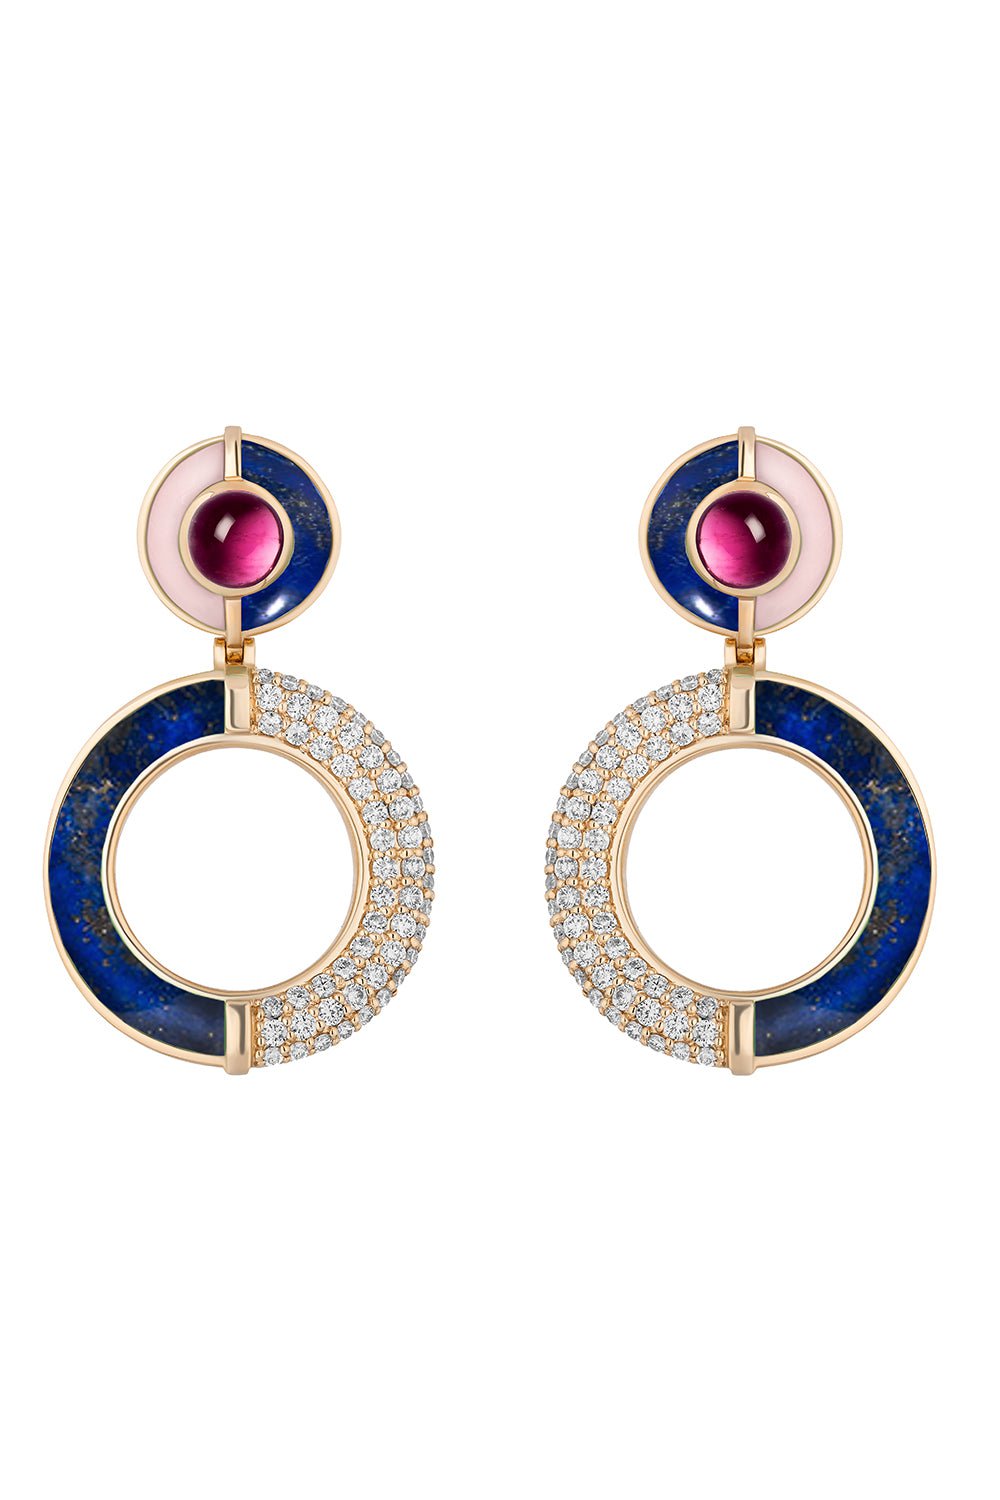 MASON & BOOKS-Sugar And Spice Statement Earrings-YELLOW GOLD